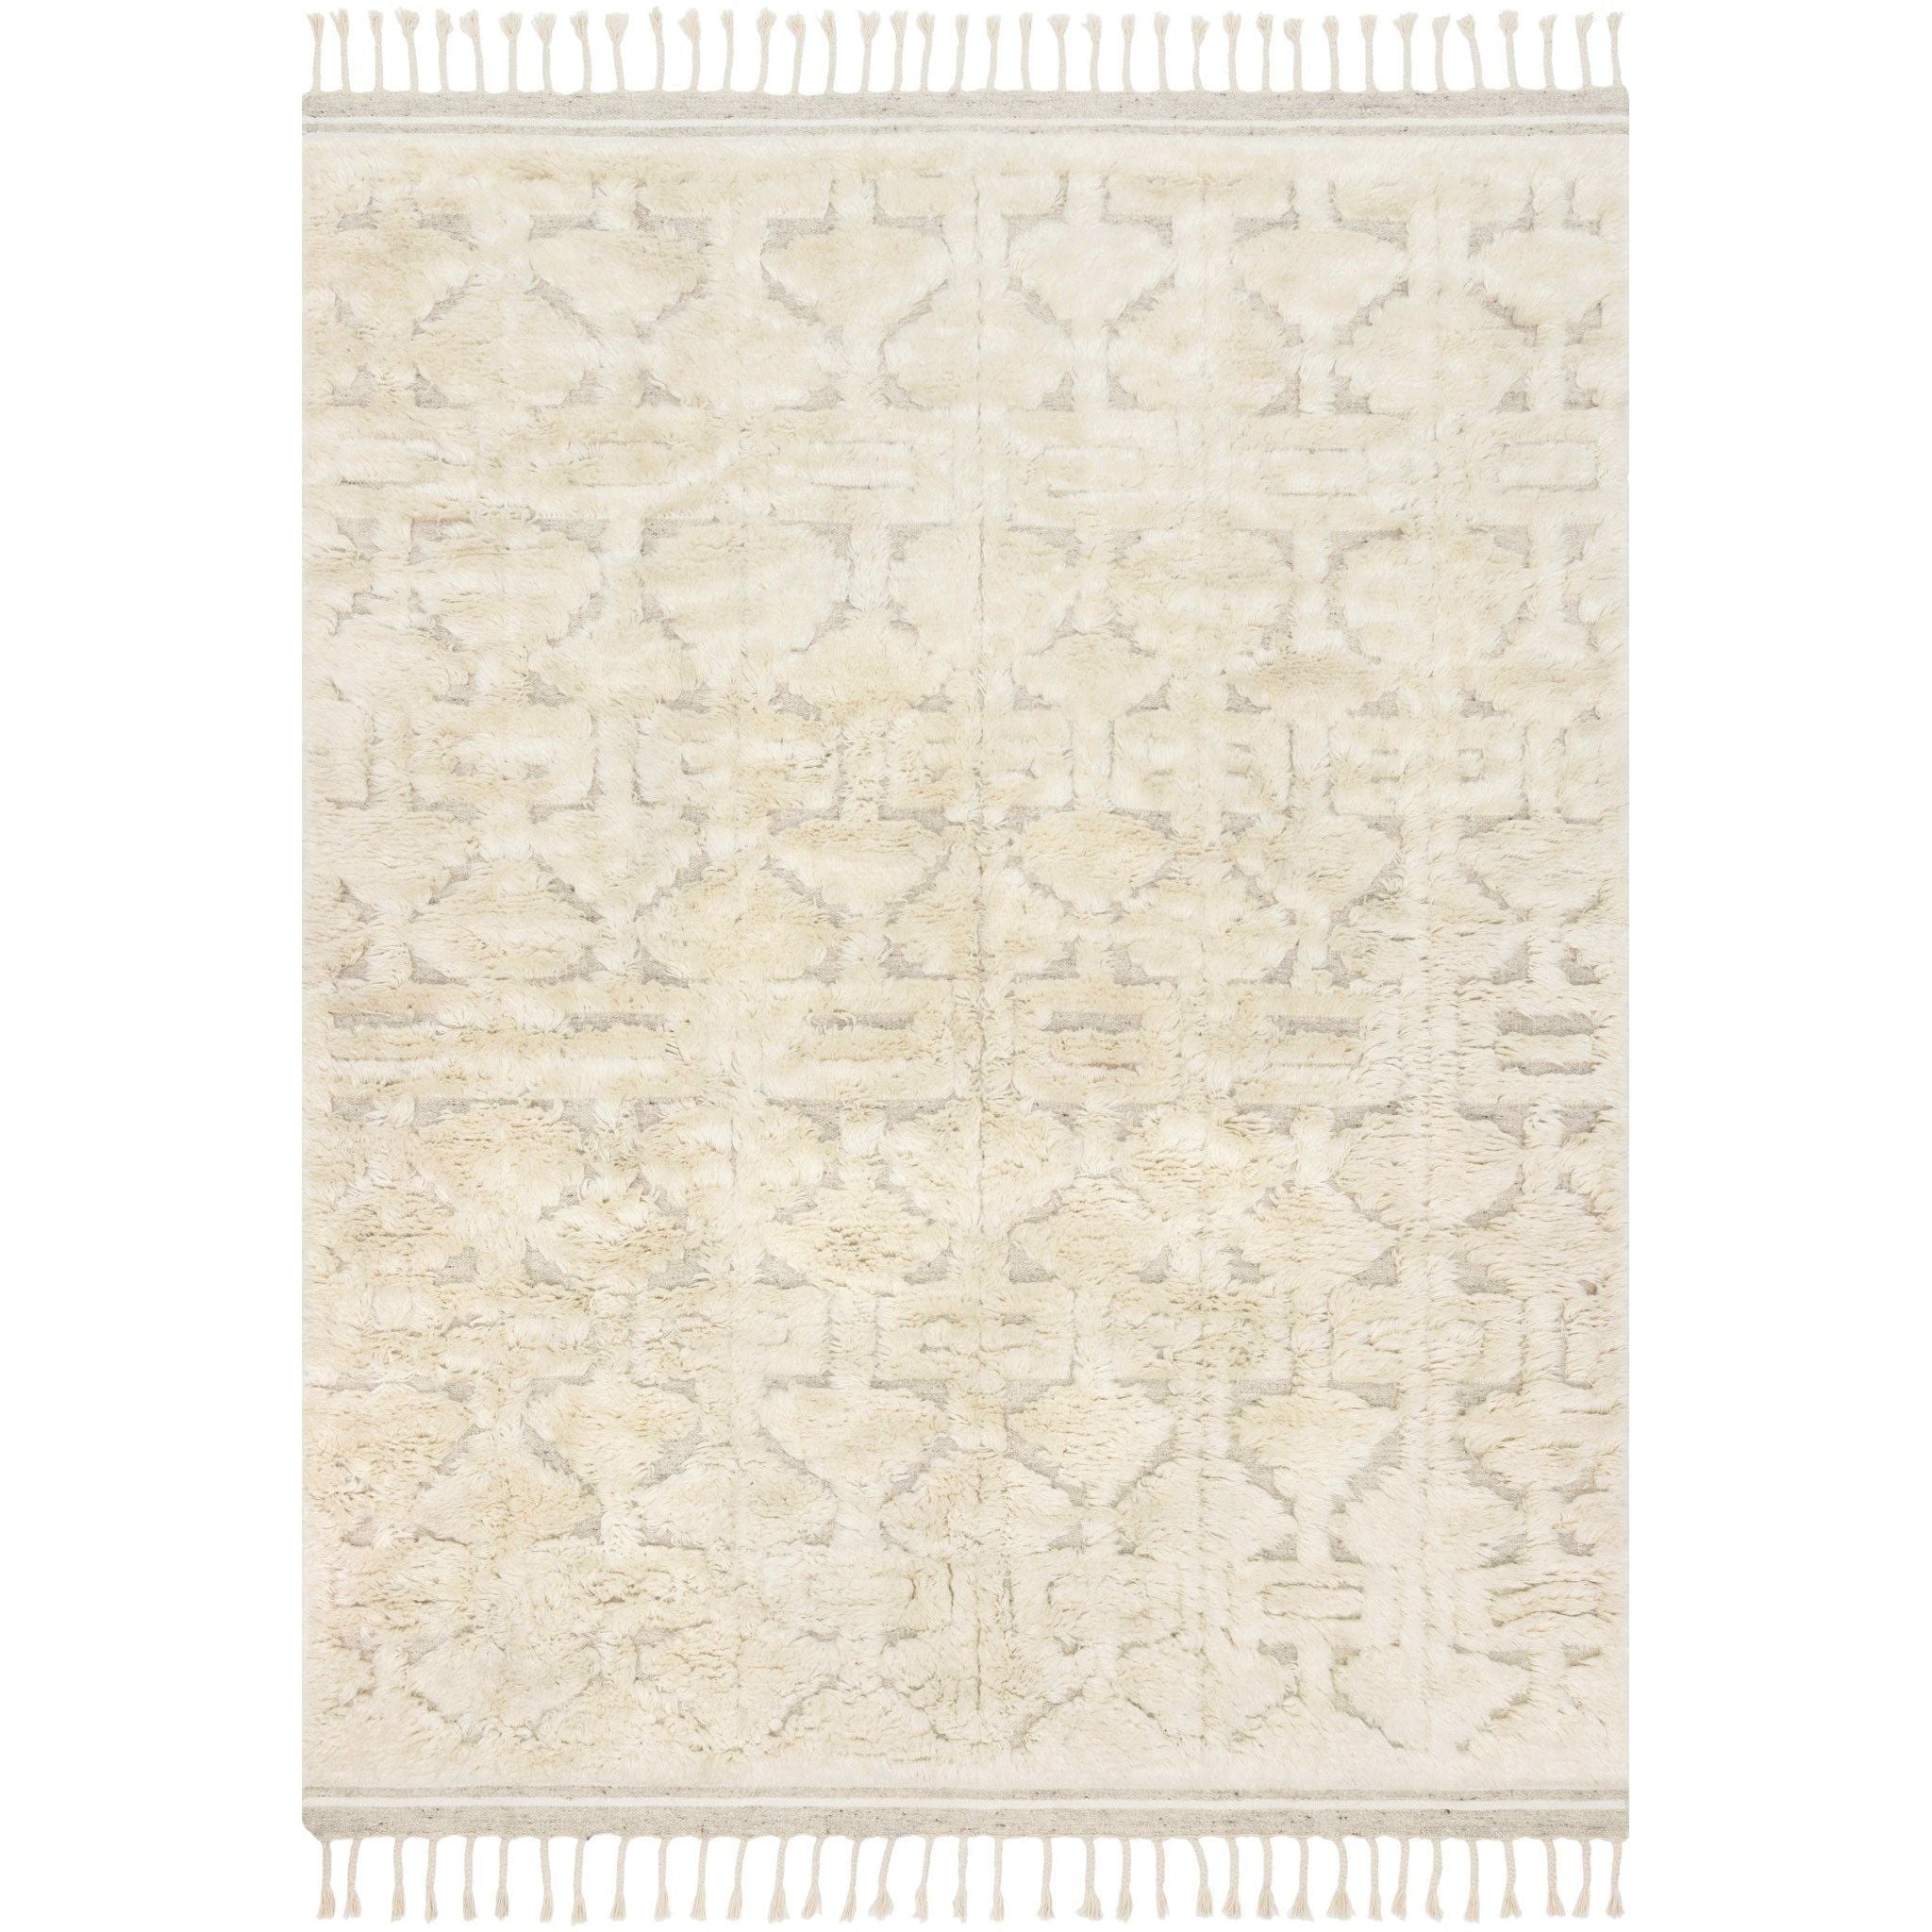 Hygge Oatmeal/Ivory Rug - Amethyst Home Inspired by Scandinavian textile motifs, the Hygge Collection combines a soft shaggy texture with an enduring neutral palette. Each piece is hand-loomed in India of 100% wool, ensuring long-wearing durability in even the busiest of rooms.   